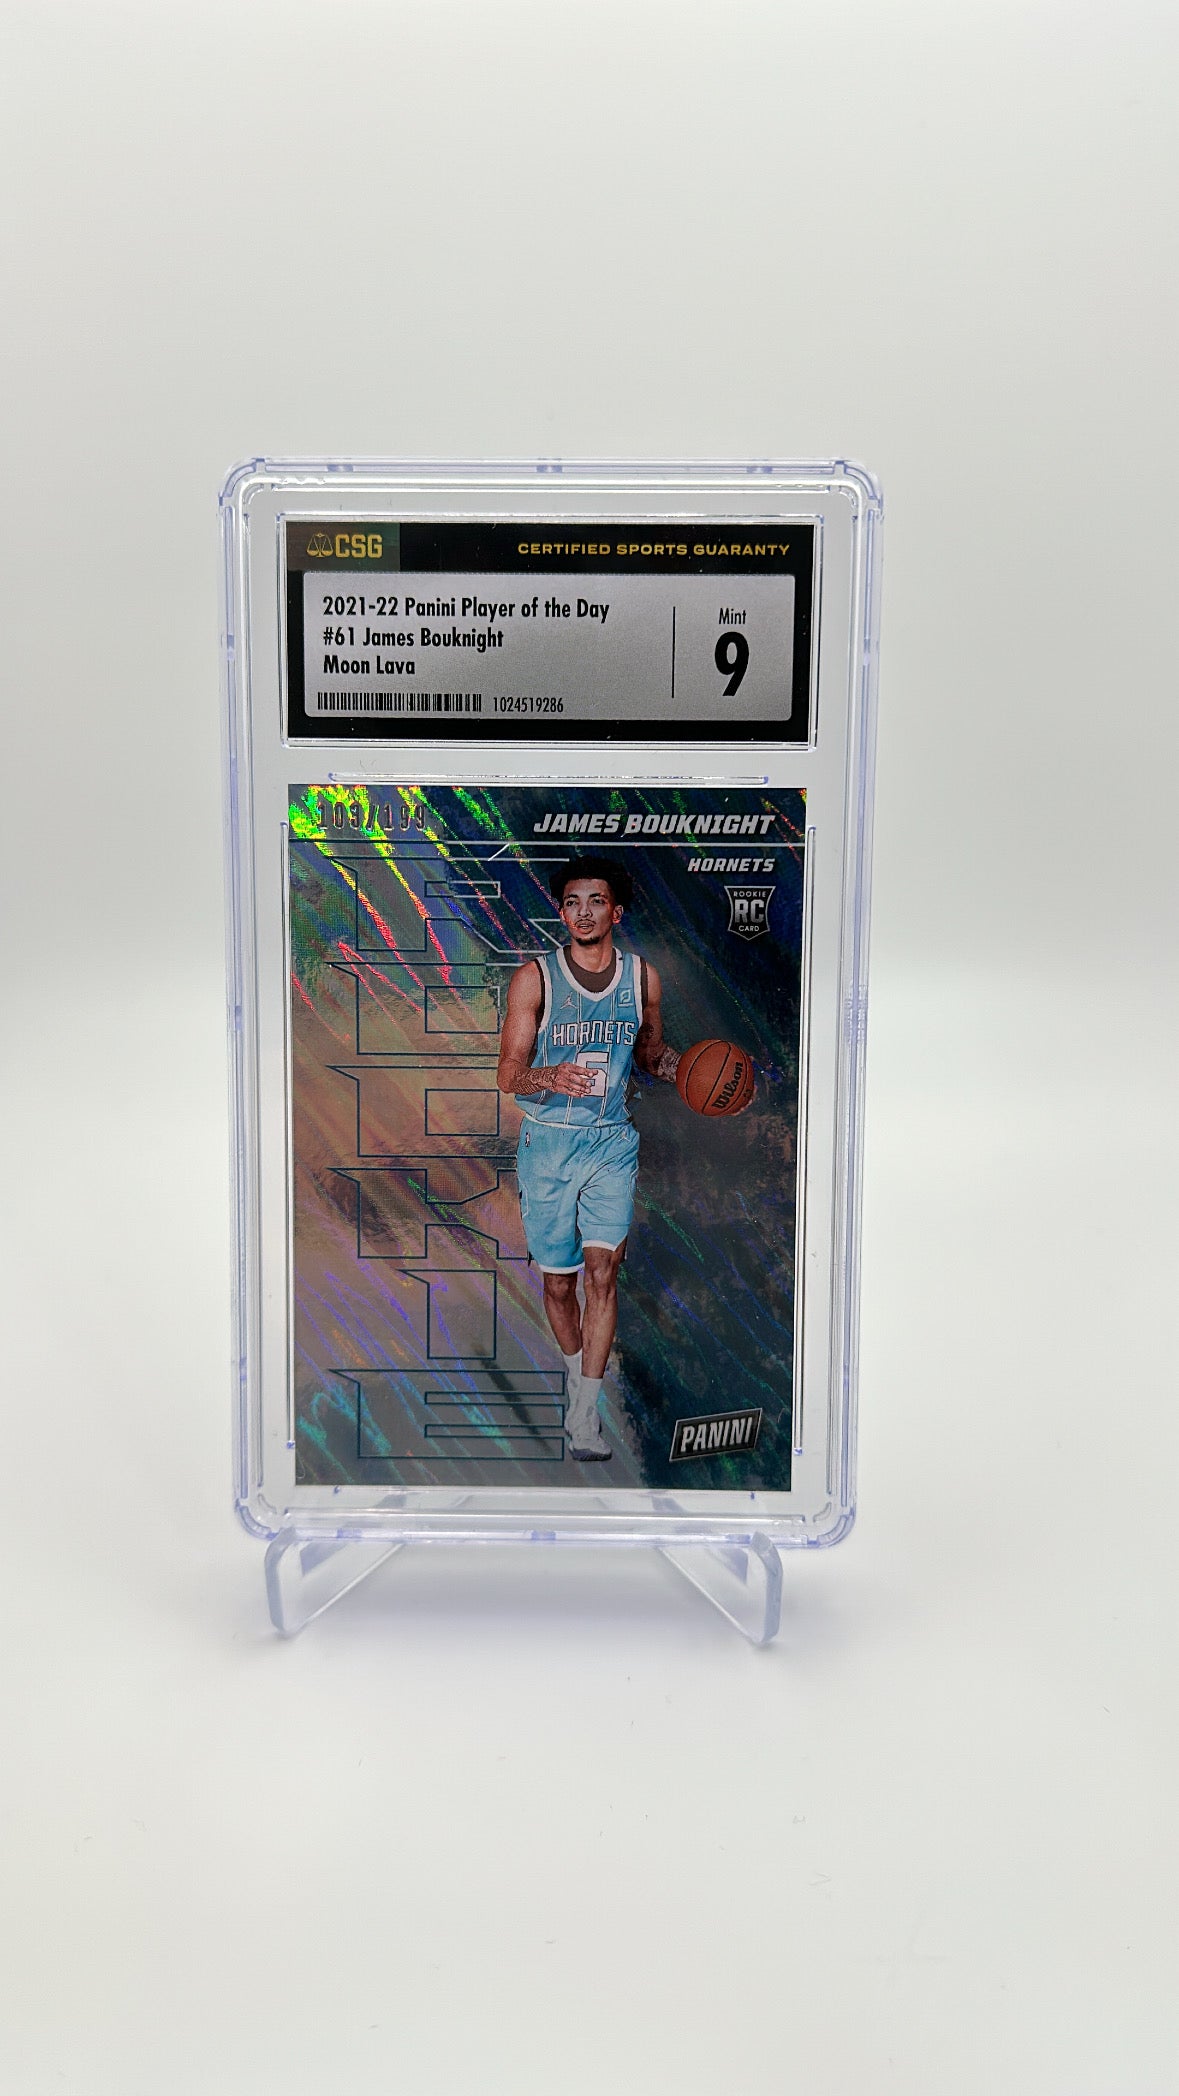 2021-22 Panini Player of the Day - James Bouknight 61 - Moon Lava /199 - CSG CGC 9